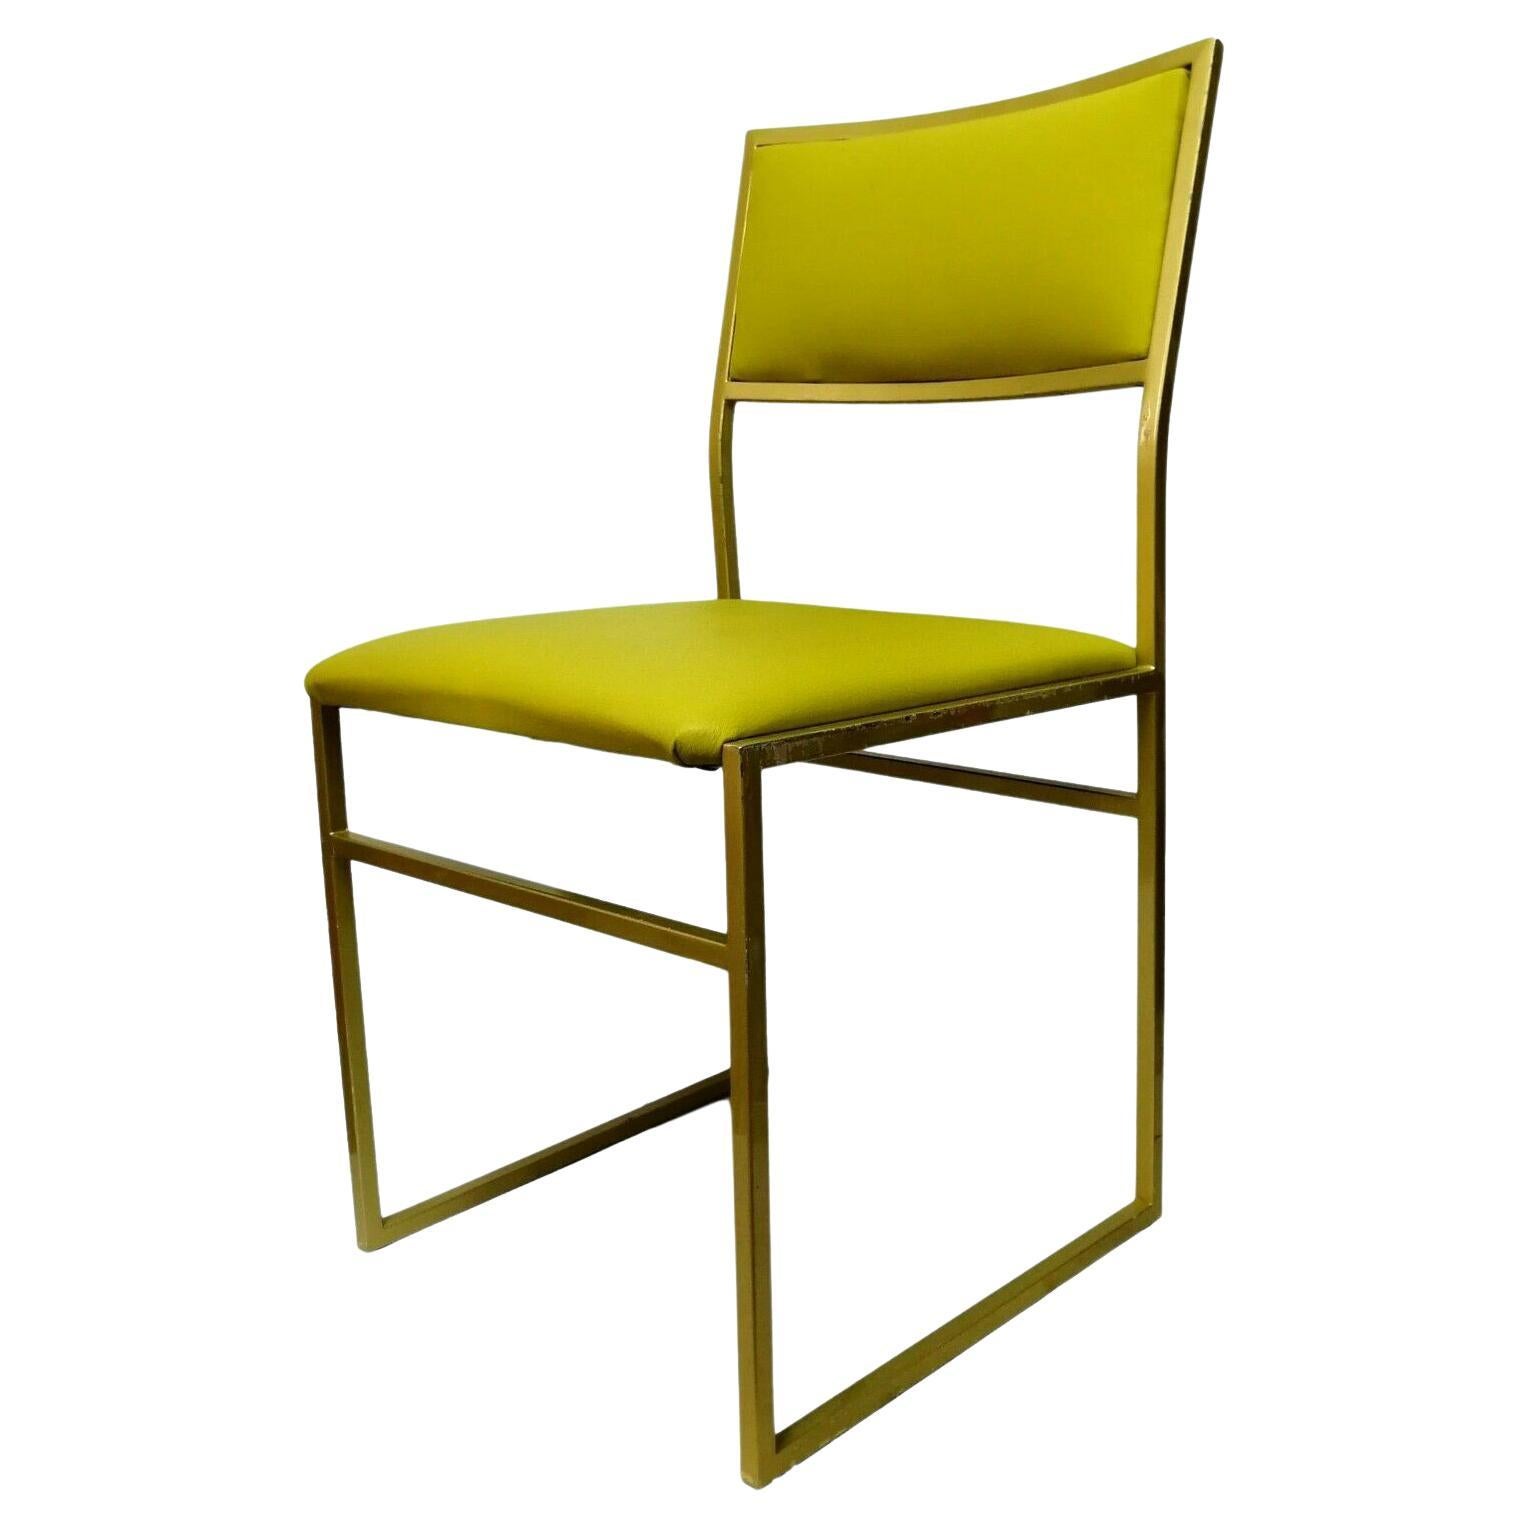 Collectible Chair in Gold Metal and Acid Green Upholstery, 1970s For Sale